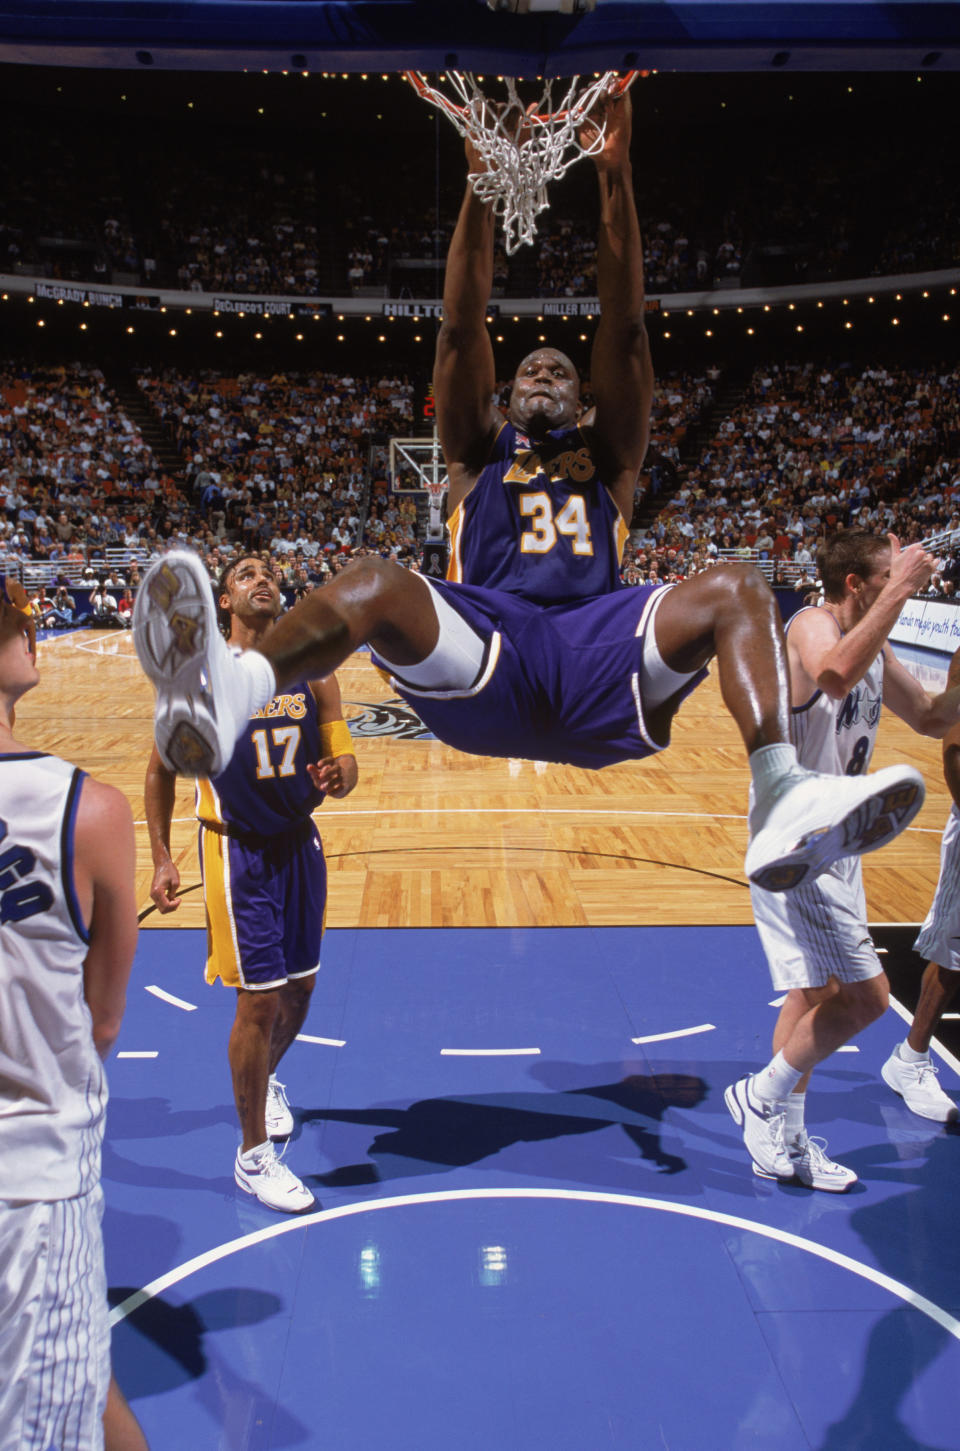 Shaquille O'Neal hangs from the basket during the NBA game against the Orlando Magic at the TD Waterhouse in Orlando, Florida on January 30, 2002. (Andy Lyons/Getty Images)